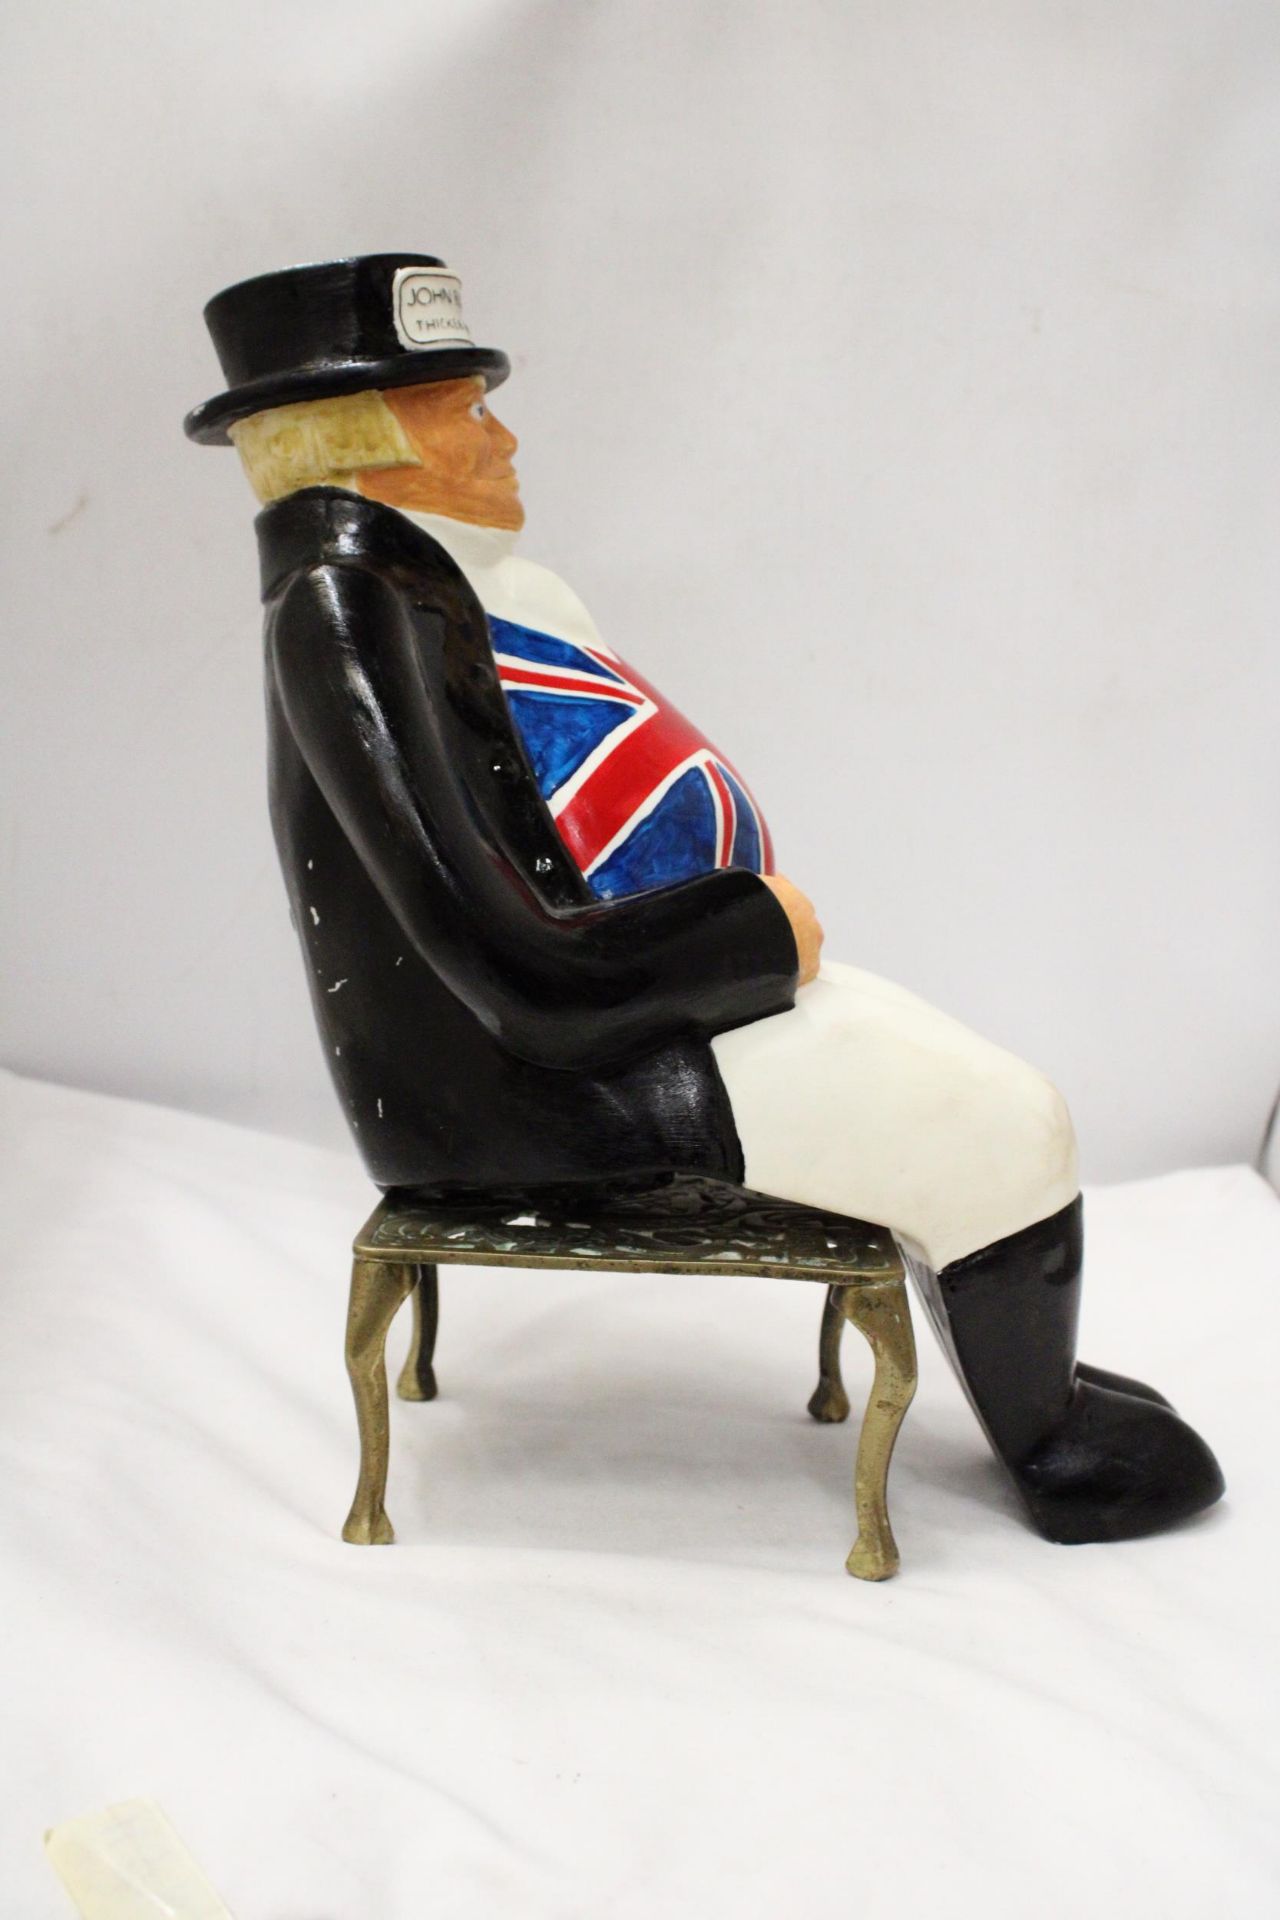 A "JOHN BULL TYRES" ORNAMENT ON BRASS STOOL - Image 3 of 5